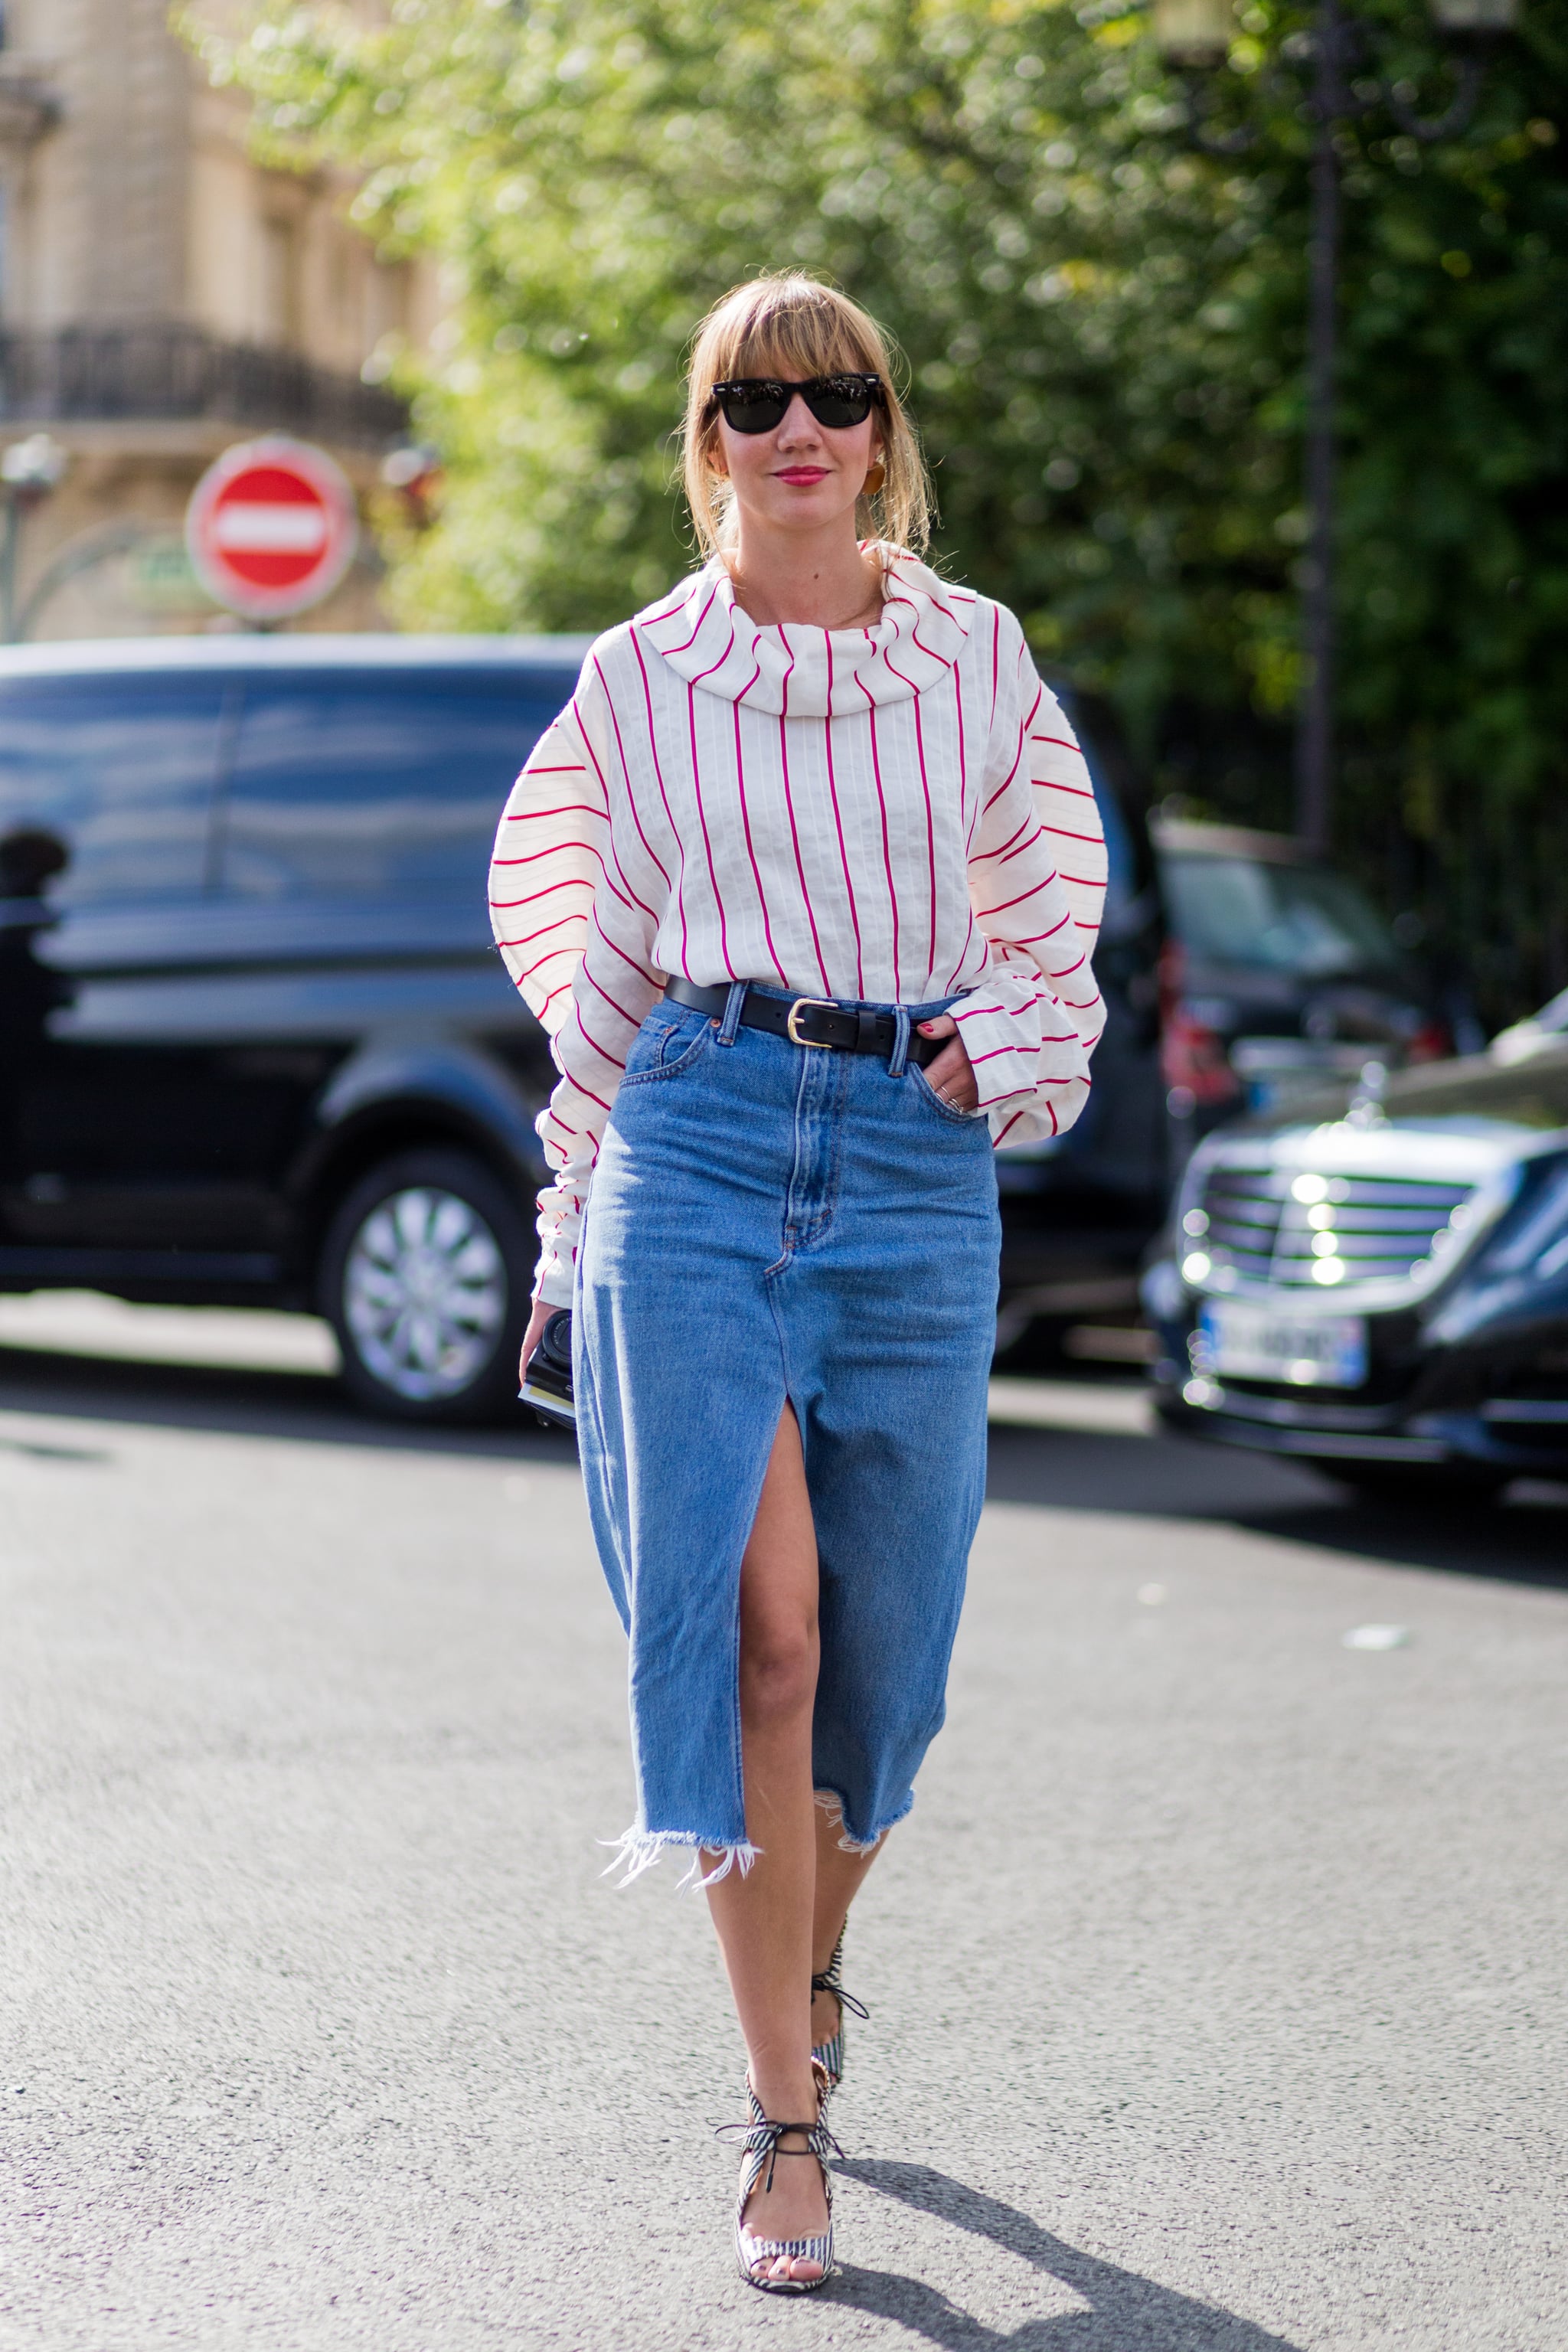 shirts to wear with a jean skirt